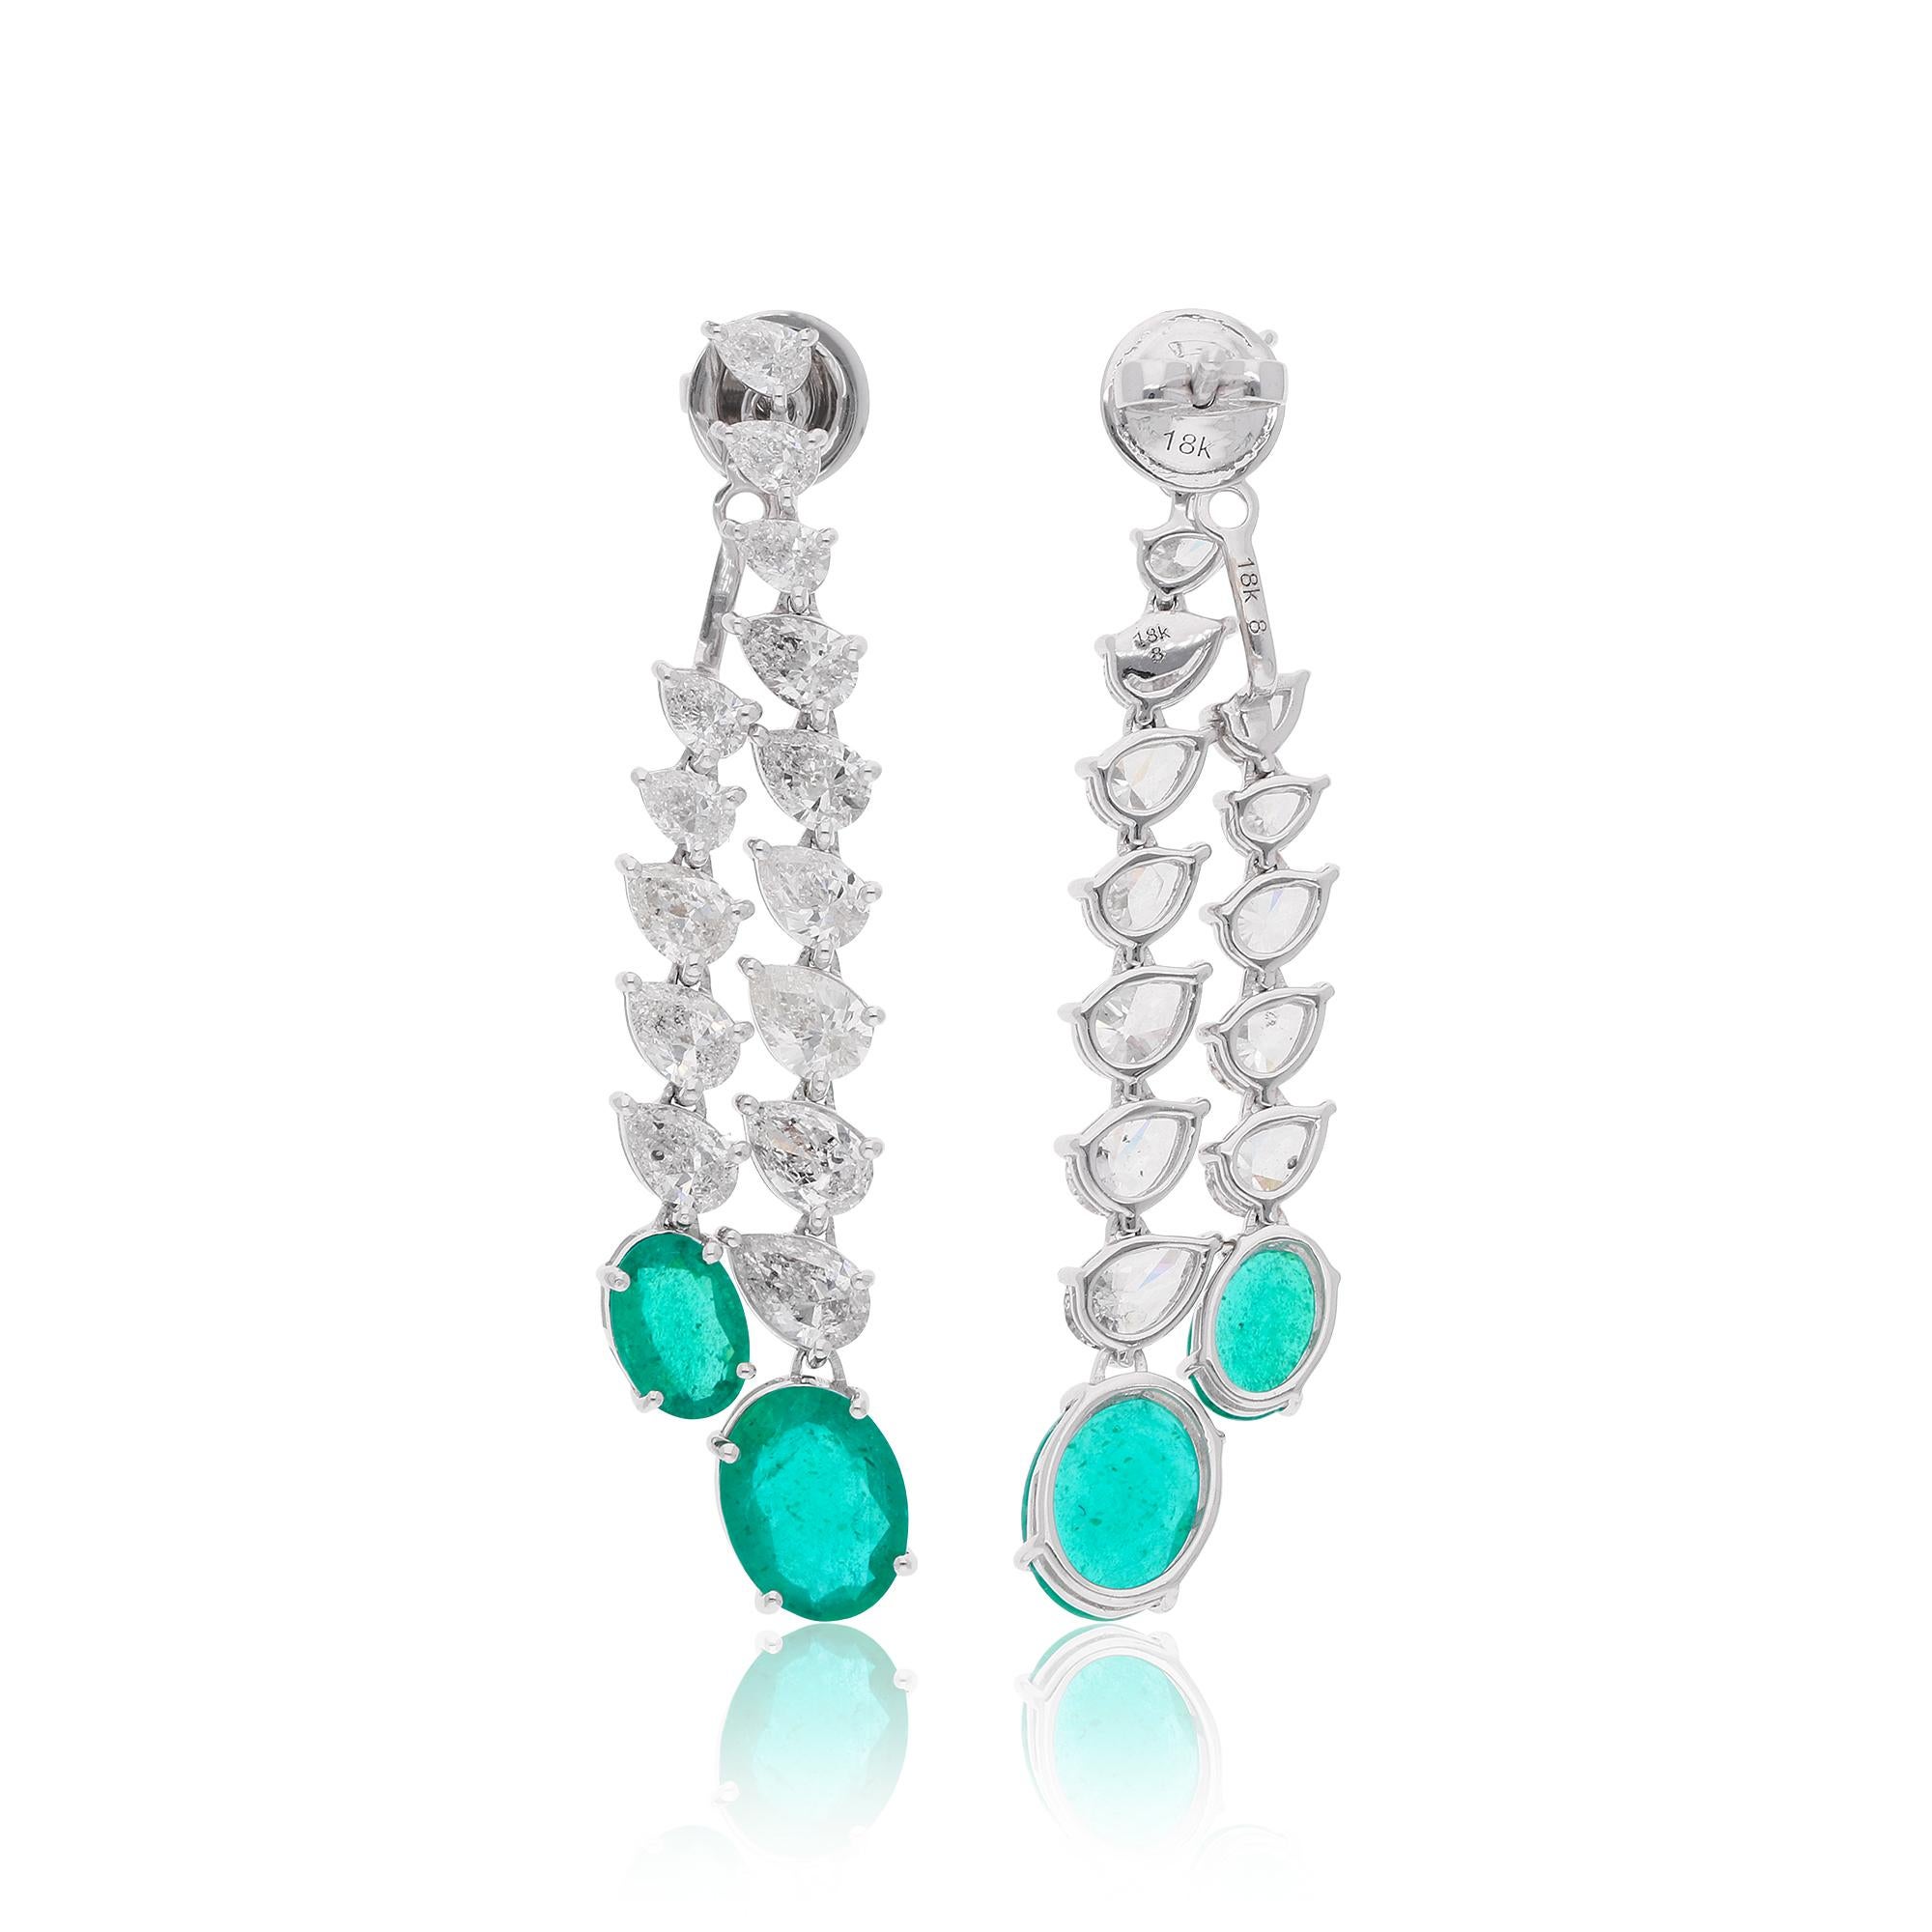 These Diamond & Emerald Dangle Earrings with 4.86 ct. Genuine Diamonds & 4.19 ct. Zambian Emerald are a promise of perfection and purity. These earrings are set in 18k Solid White Gold. You can choose these earrings in 10k/14k/18k, Rose Gold/Yellow